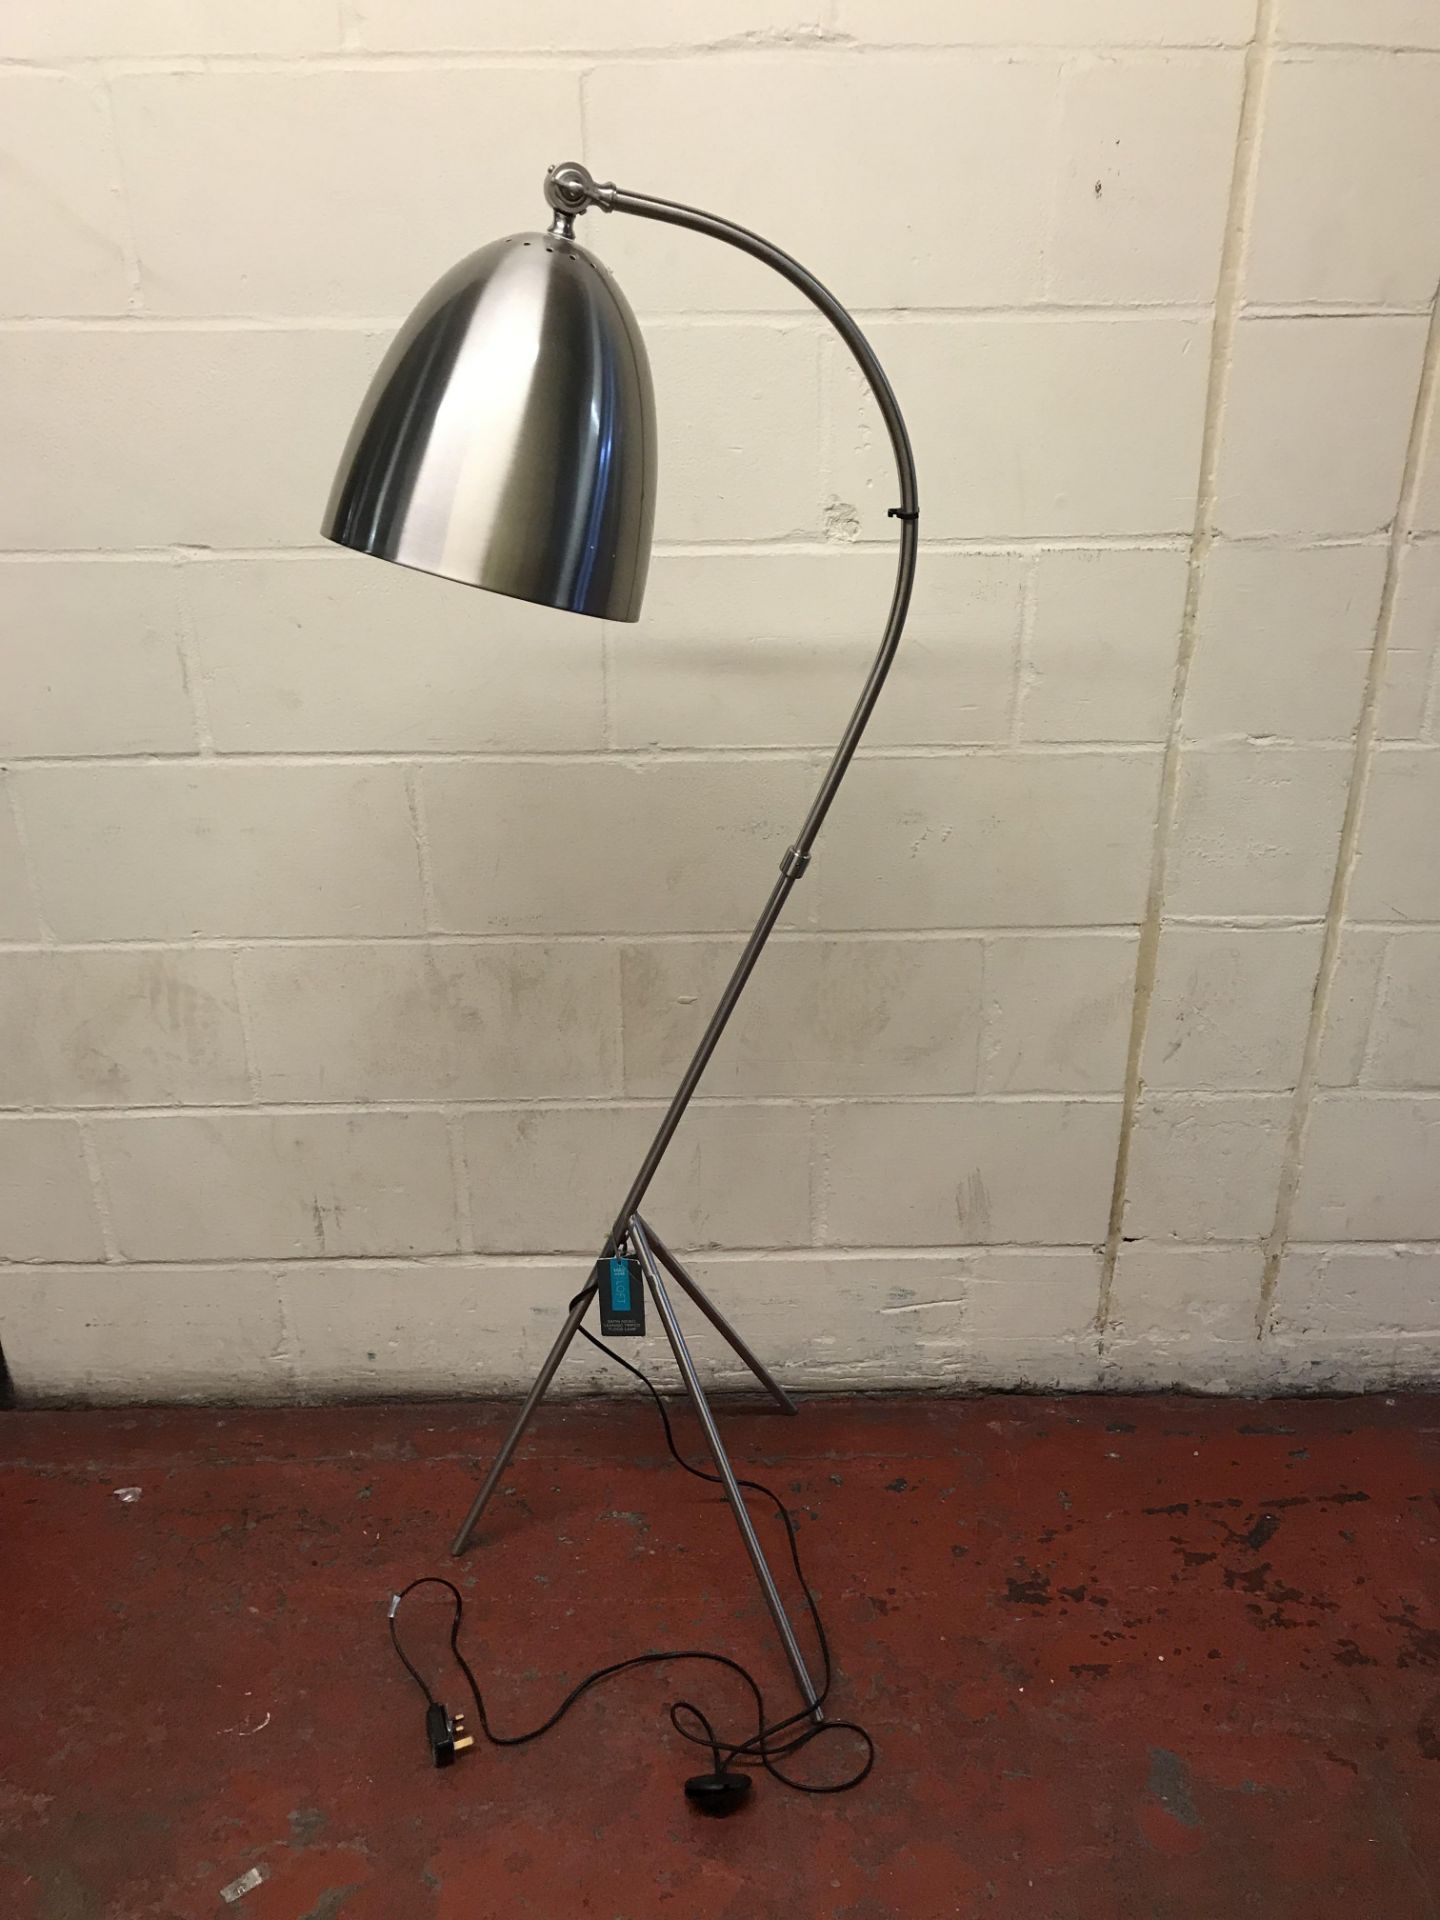 Leaning Tripod Floor Lamp (no power damaged switch, see image)